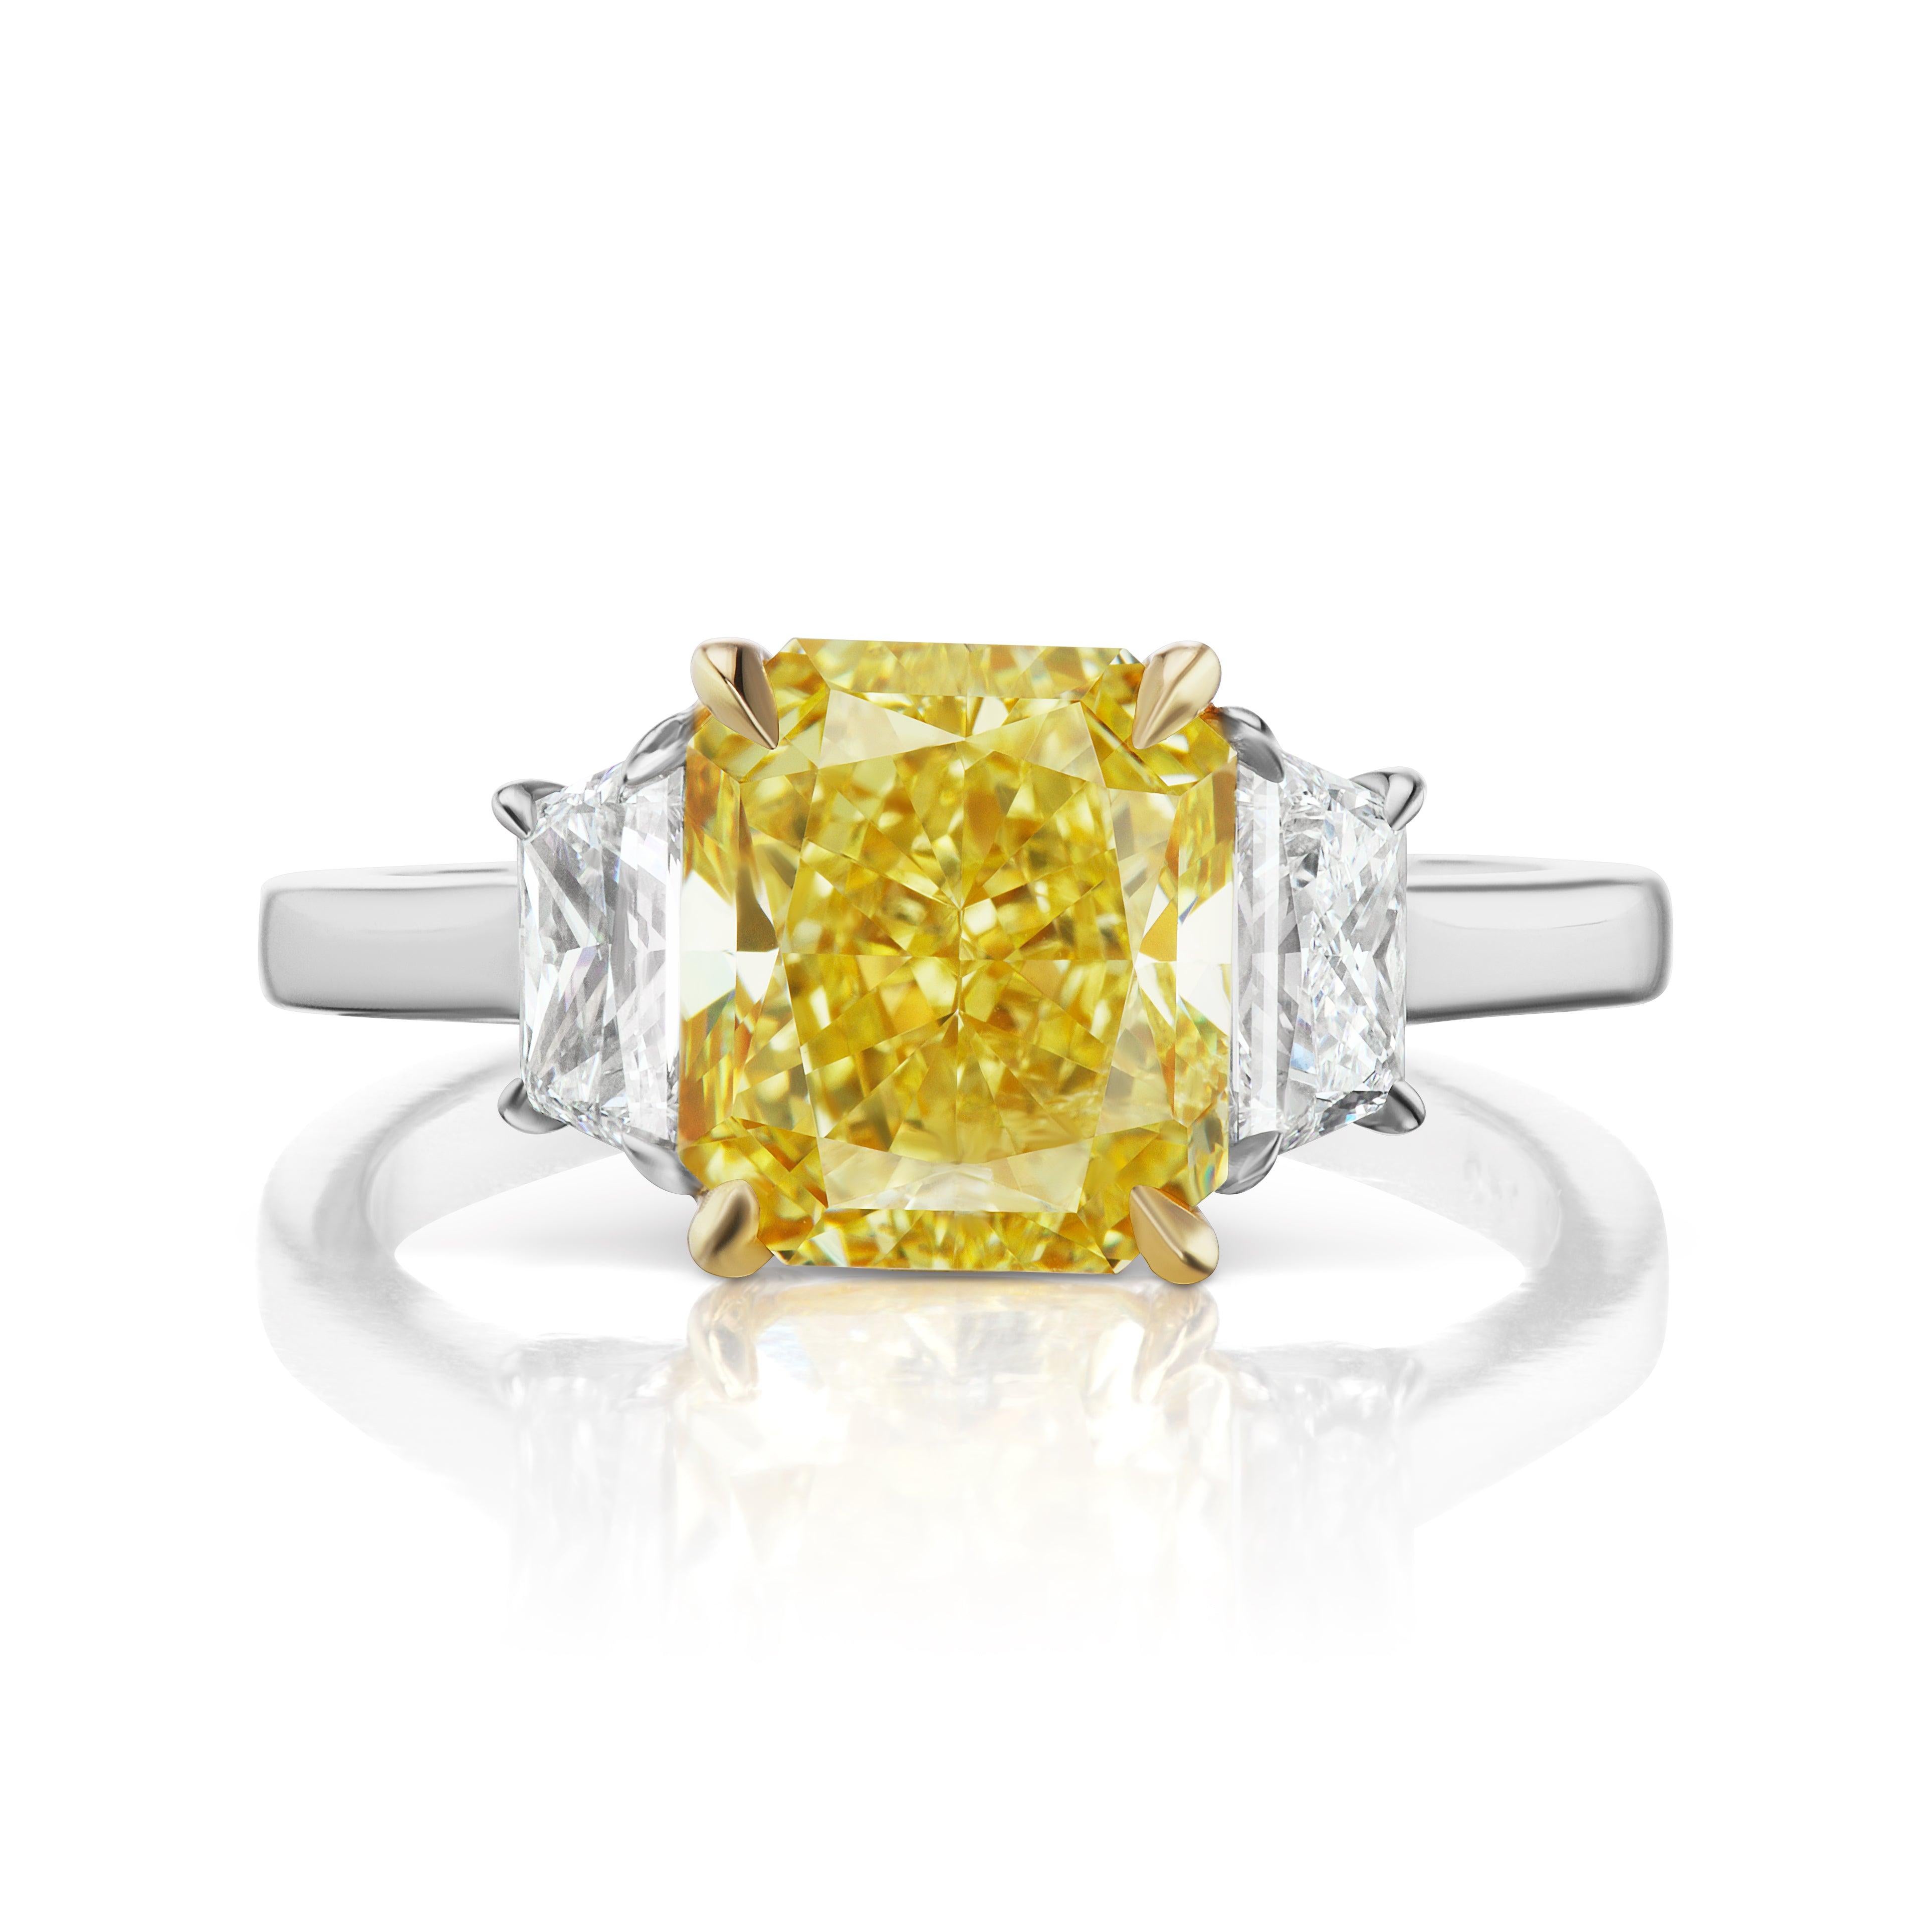 KATYA YELLOW DIAMOND ENGAGEMENT PLATINUM & 18K WHITE GOLD RING BY MIKE NEKTA
GIA CERTIFIED

Center Diamond:
Carat Weight: 3.5 Carats
Color: FANCY INTENSE YELLOW
Color Origin:  NATURAL
Color Distribution: EVEN
Style:   CUT-CORNERED RECTANGULAR